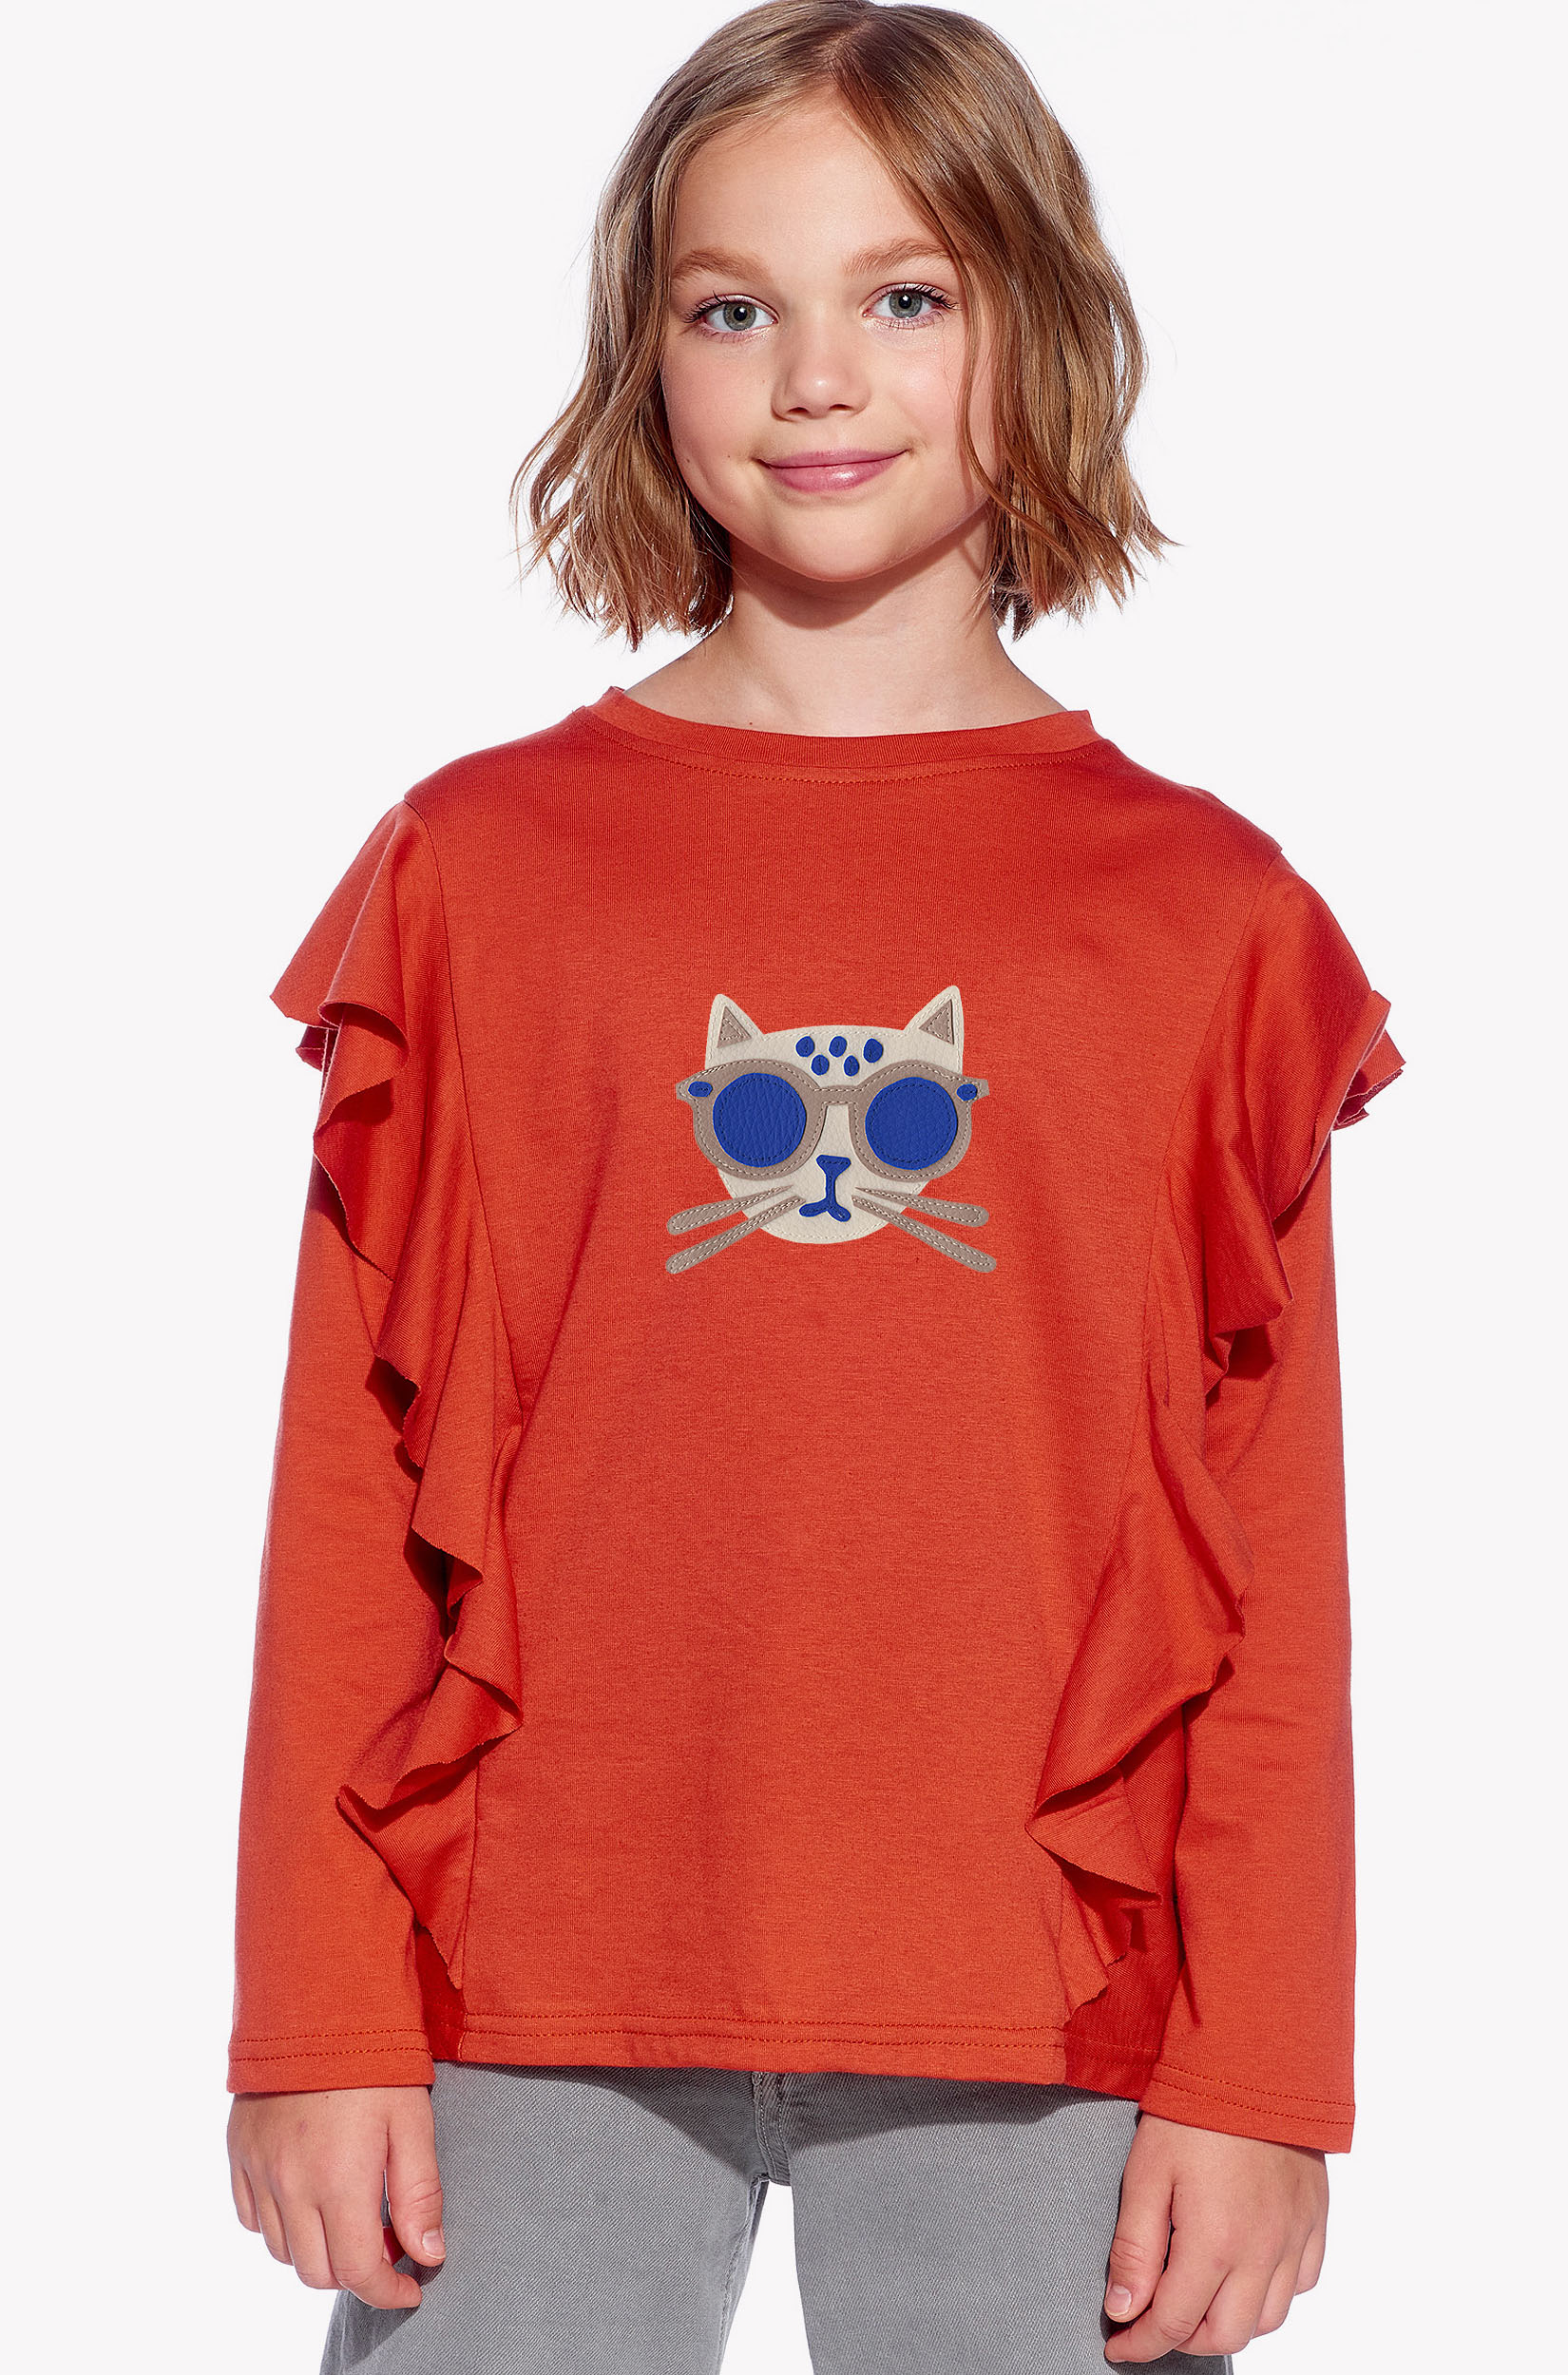 Shirt with a cat